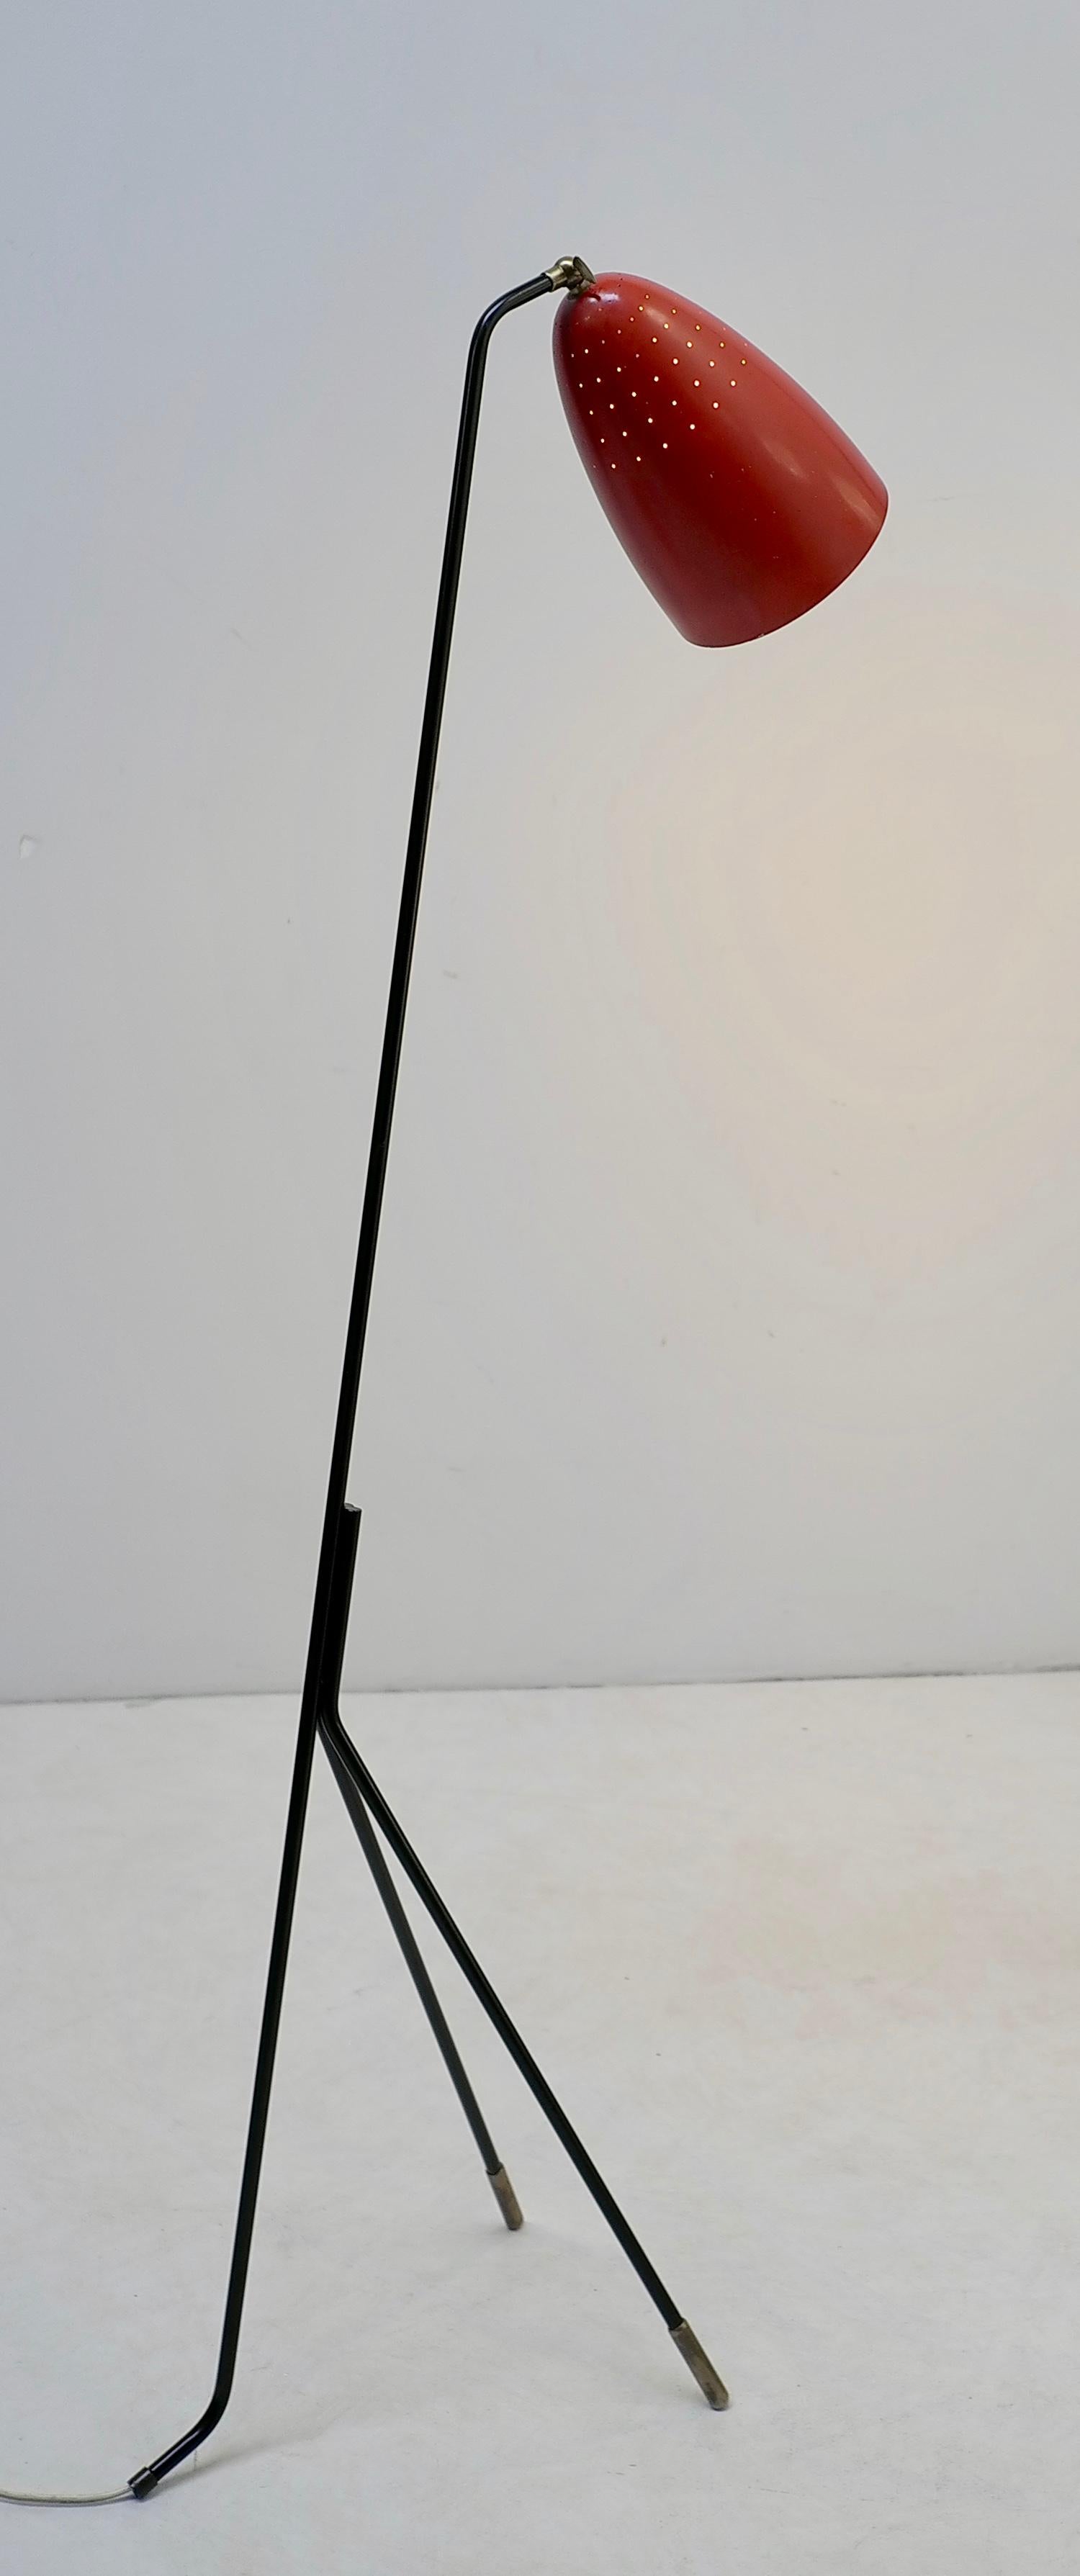 Pair of Red Danish Grasshopper Floor Lamps by Svend Aage Holm Sørensen For Sale 1